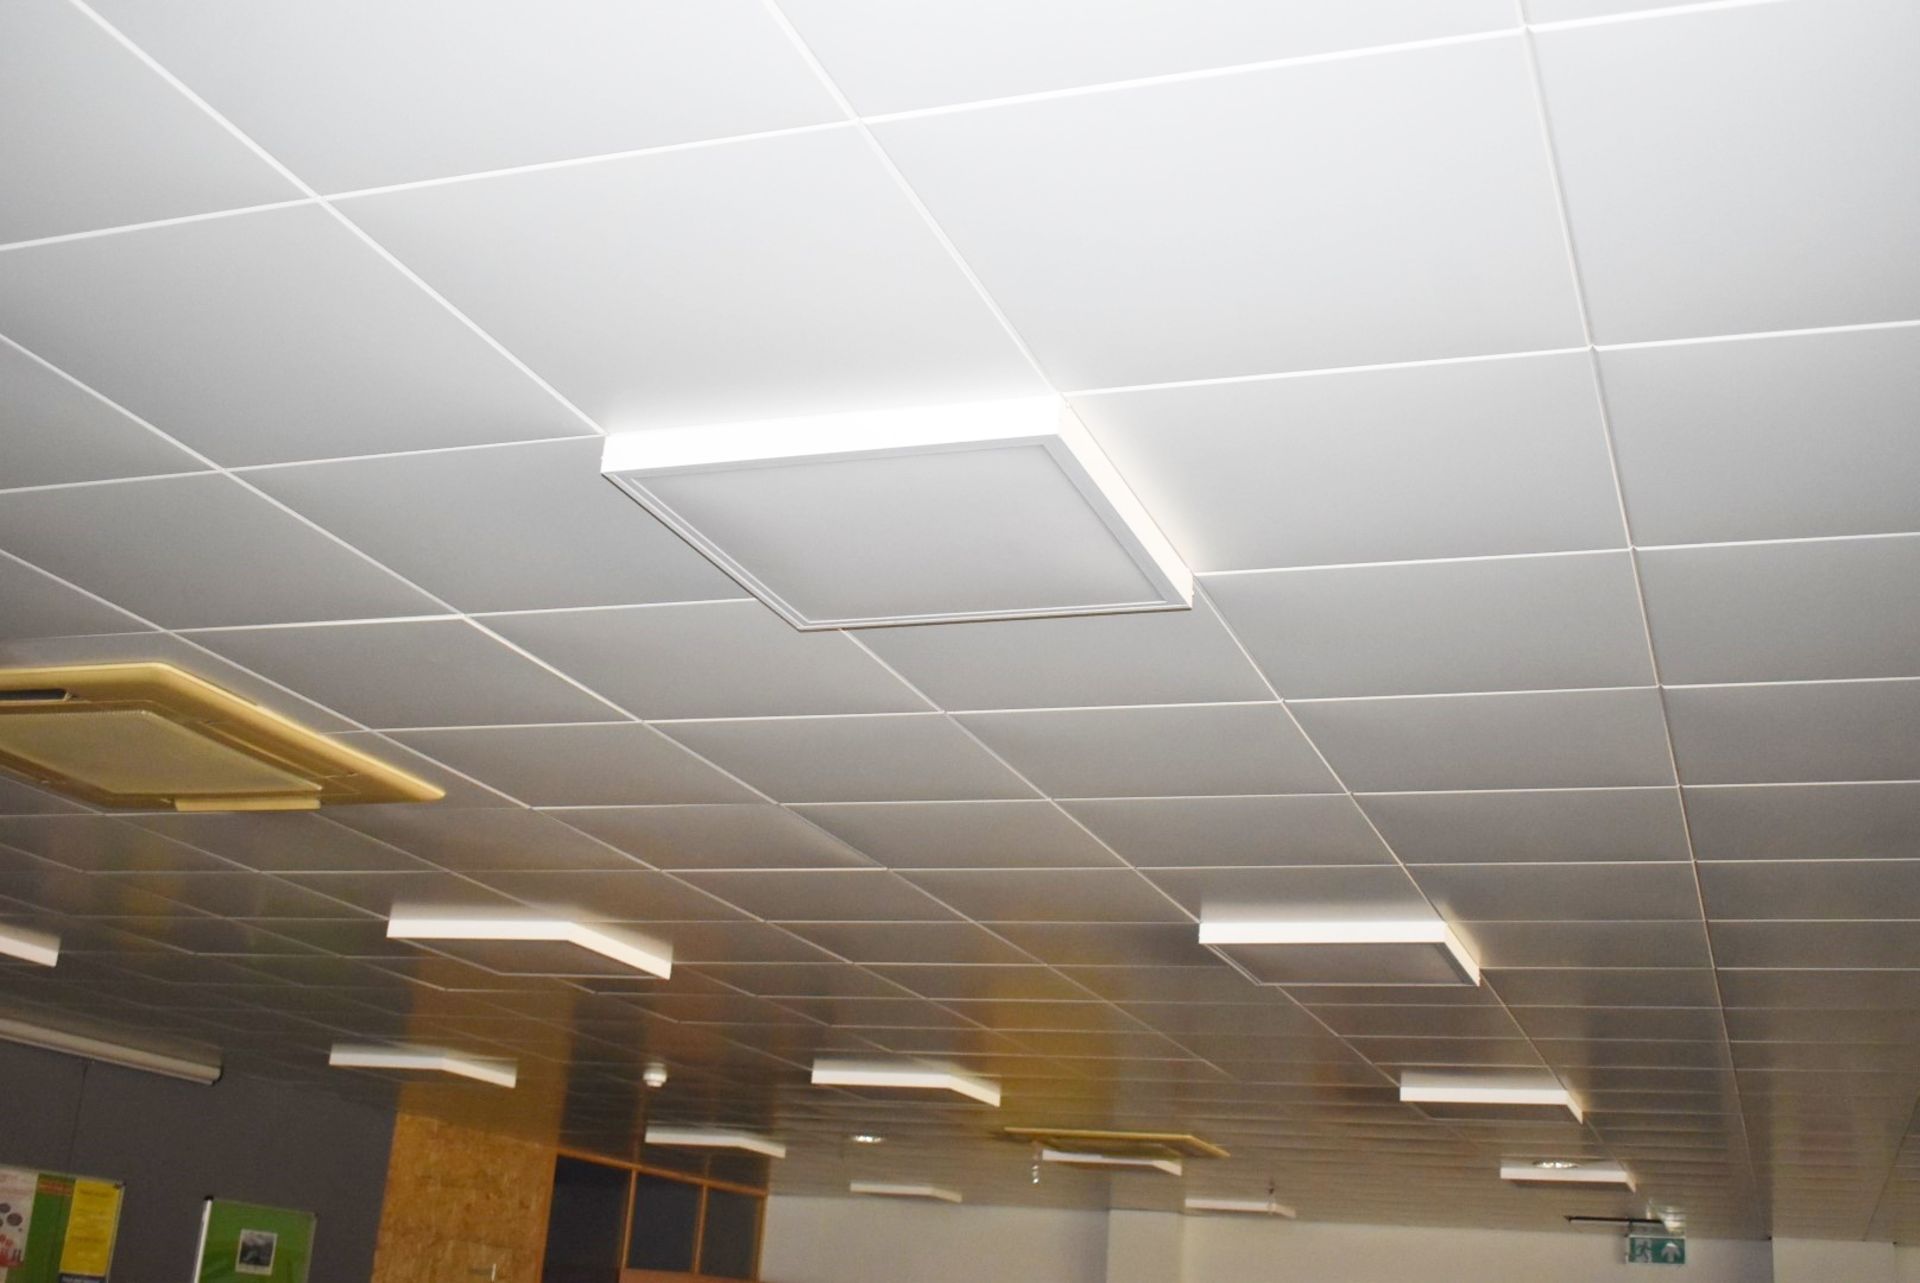 Approx 1,200 x White Metal Office Ceiling Panels - Each Panel Measures 60 x 60 cms - CL529 - - Image 2 of 6